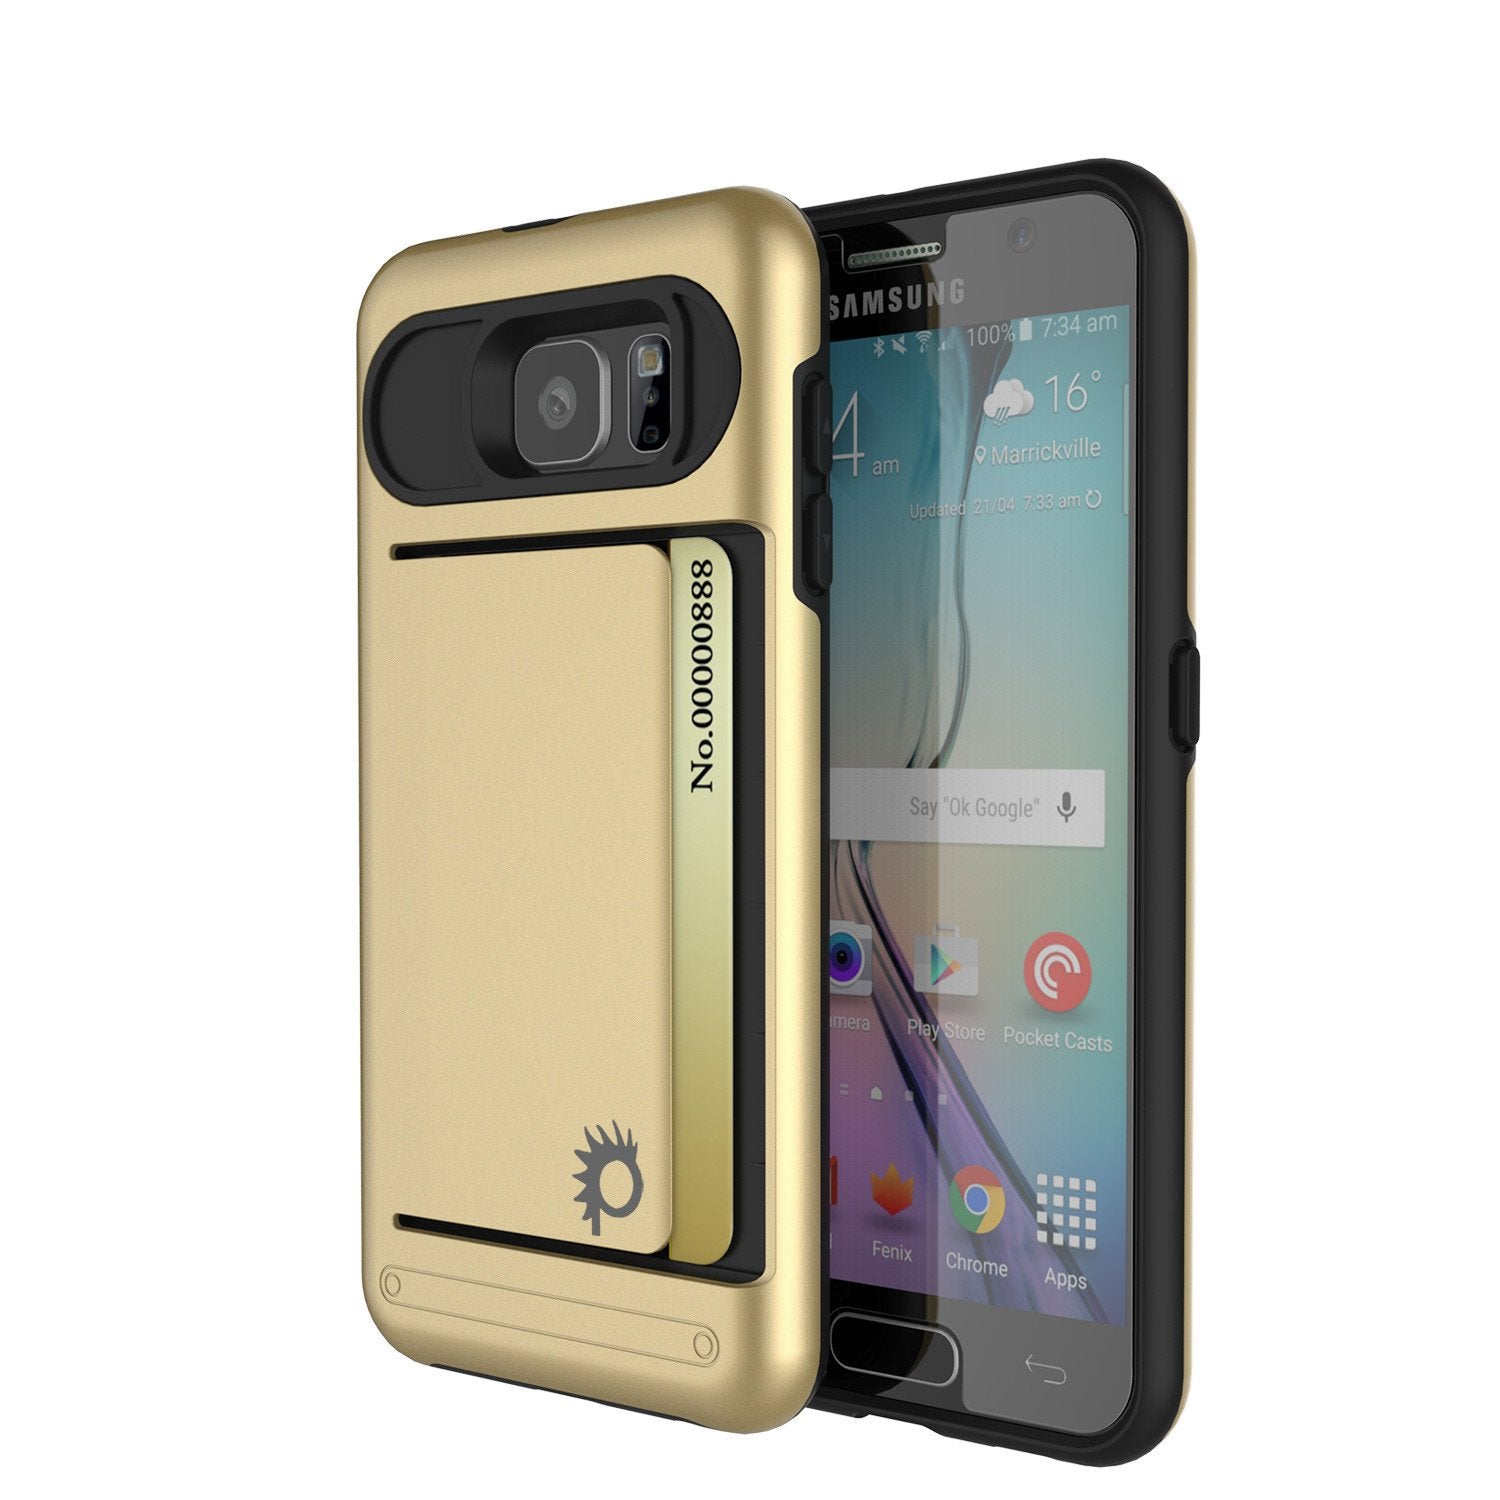 Galaxy S6 EDGE Case PunkCase CLUTCH Gold Series Slim Armor Soft Cover Case w/ Screen Protector